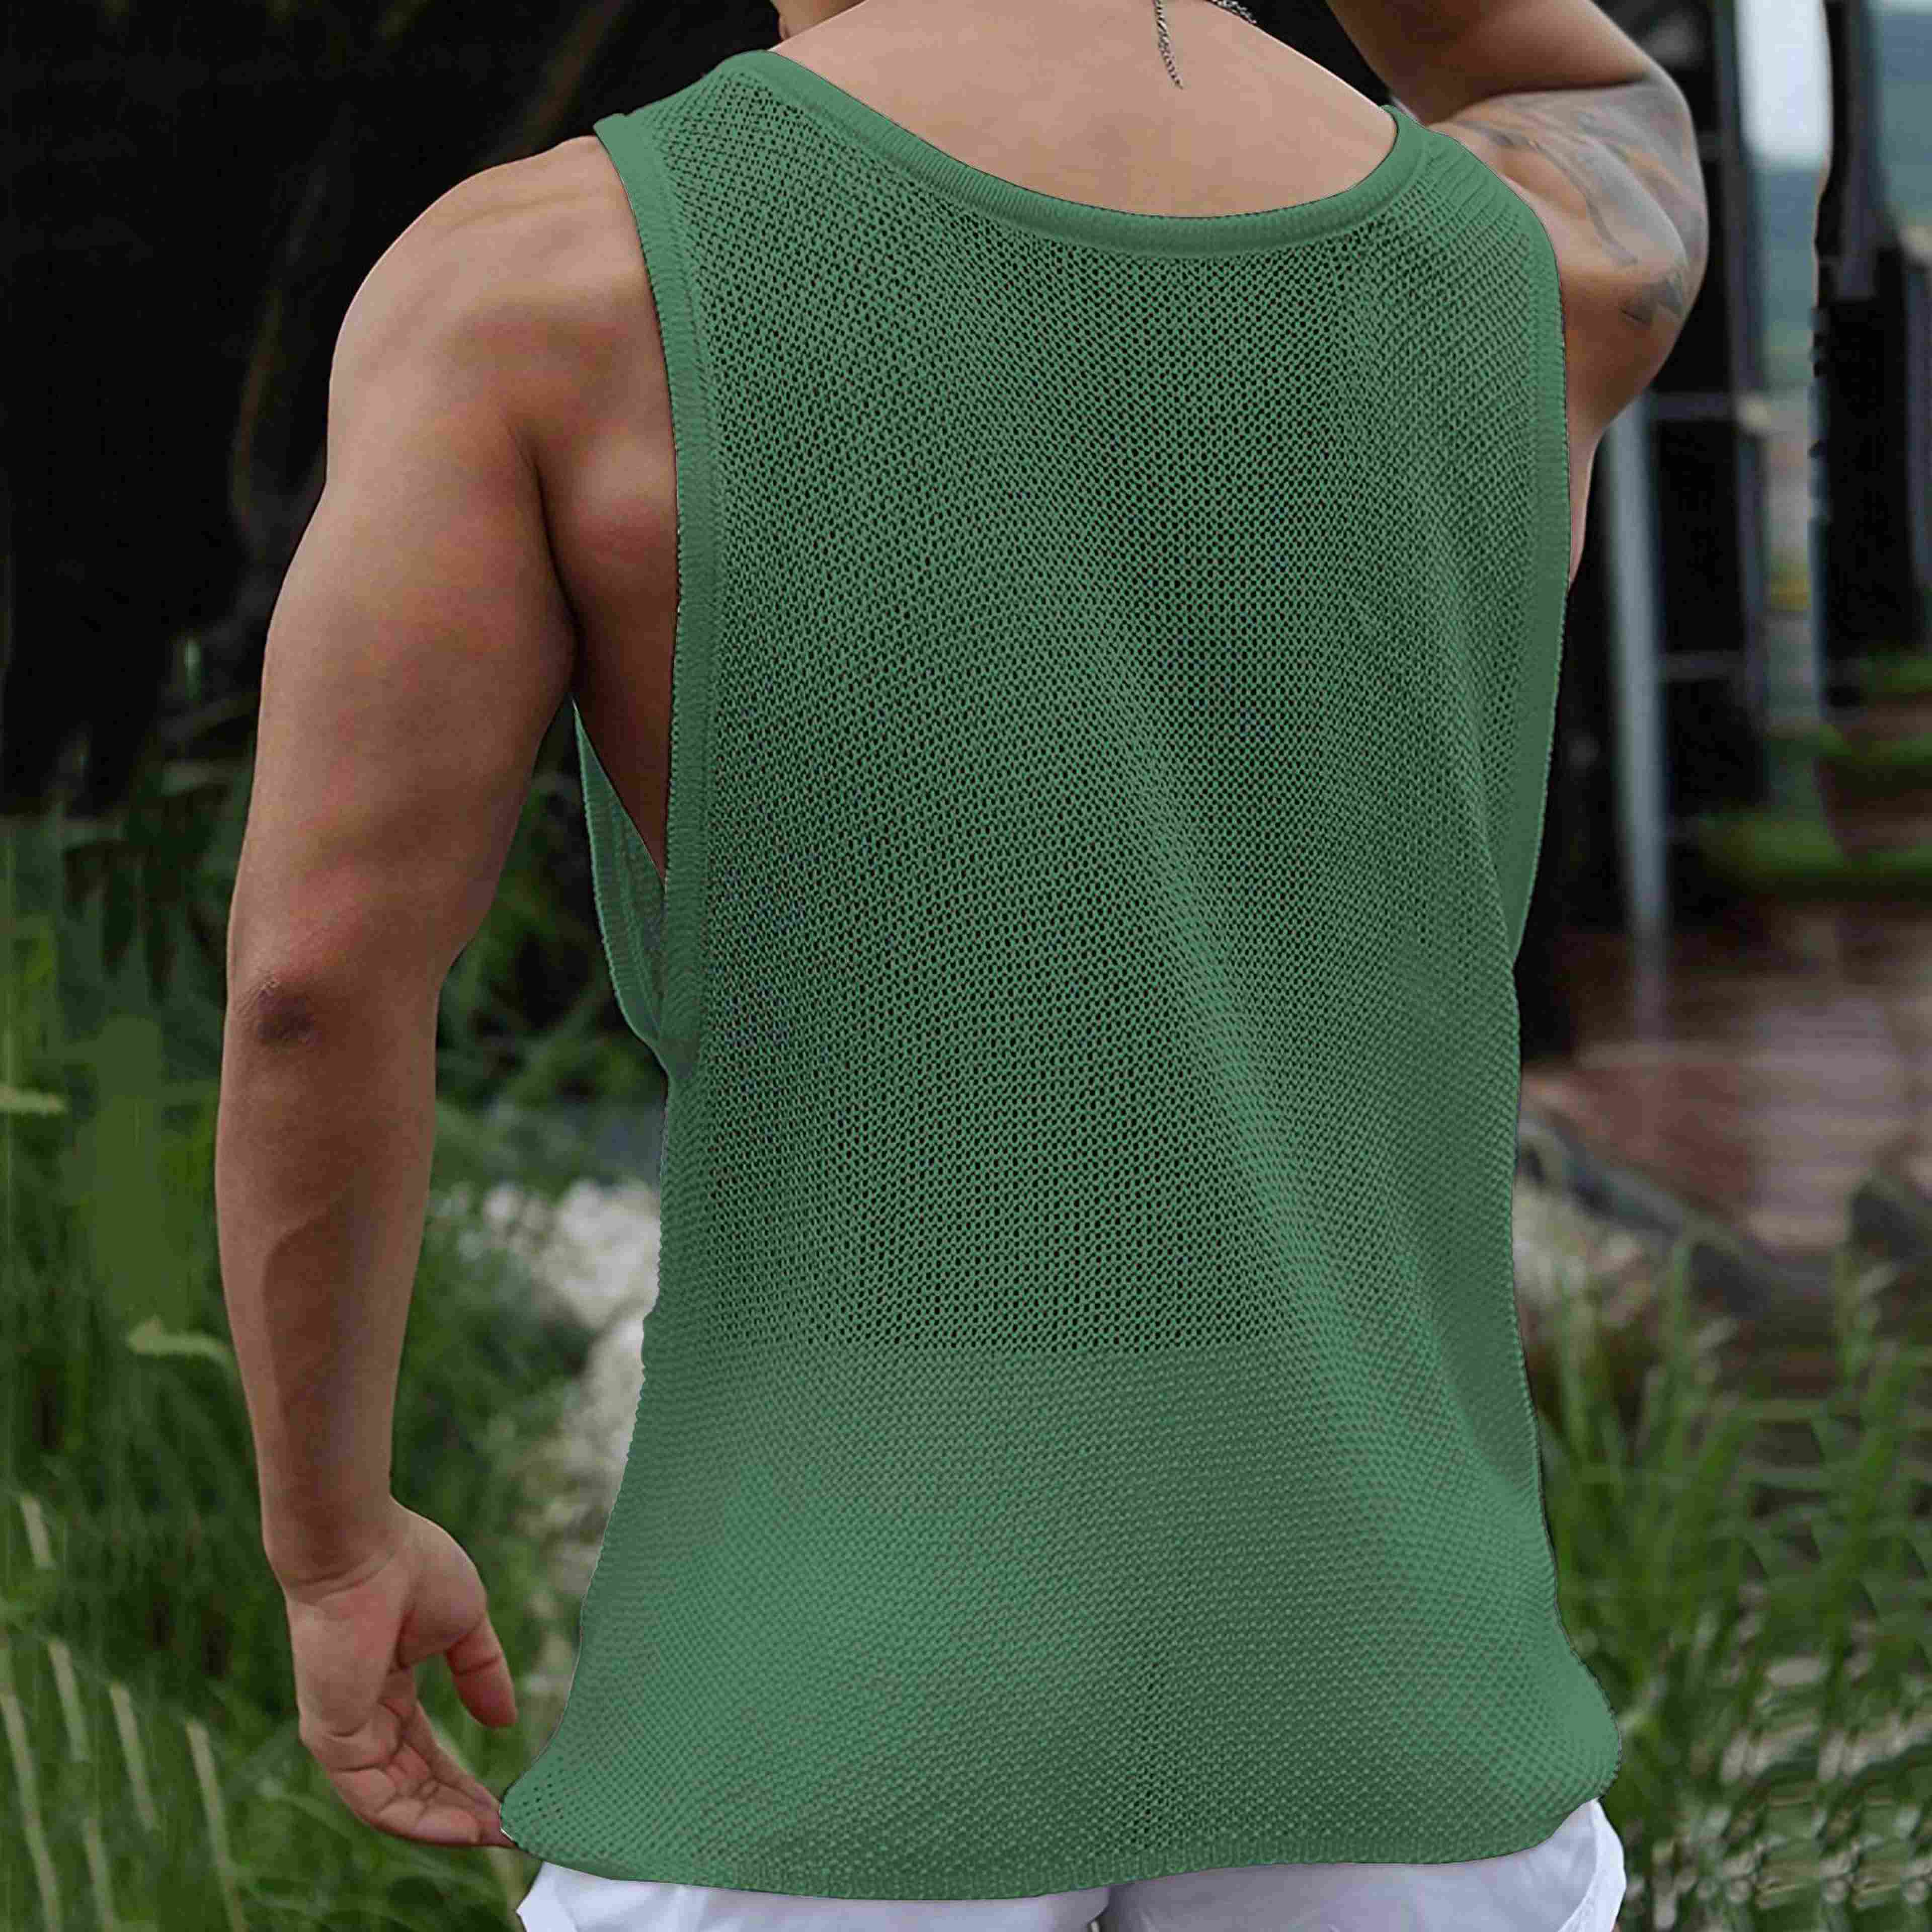 Solid Color Sleeveless Knit Vest